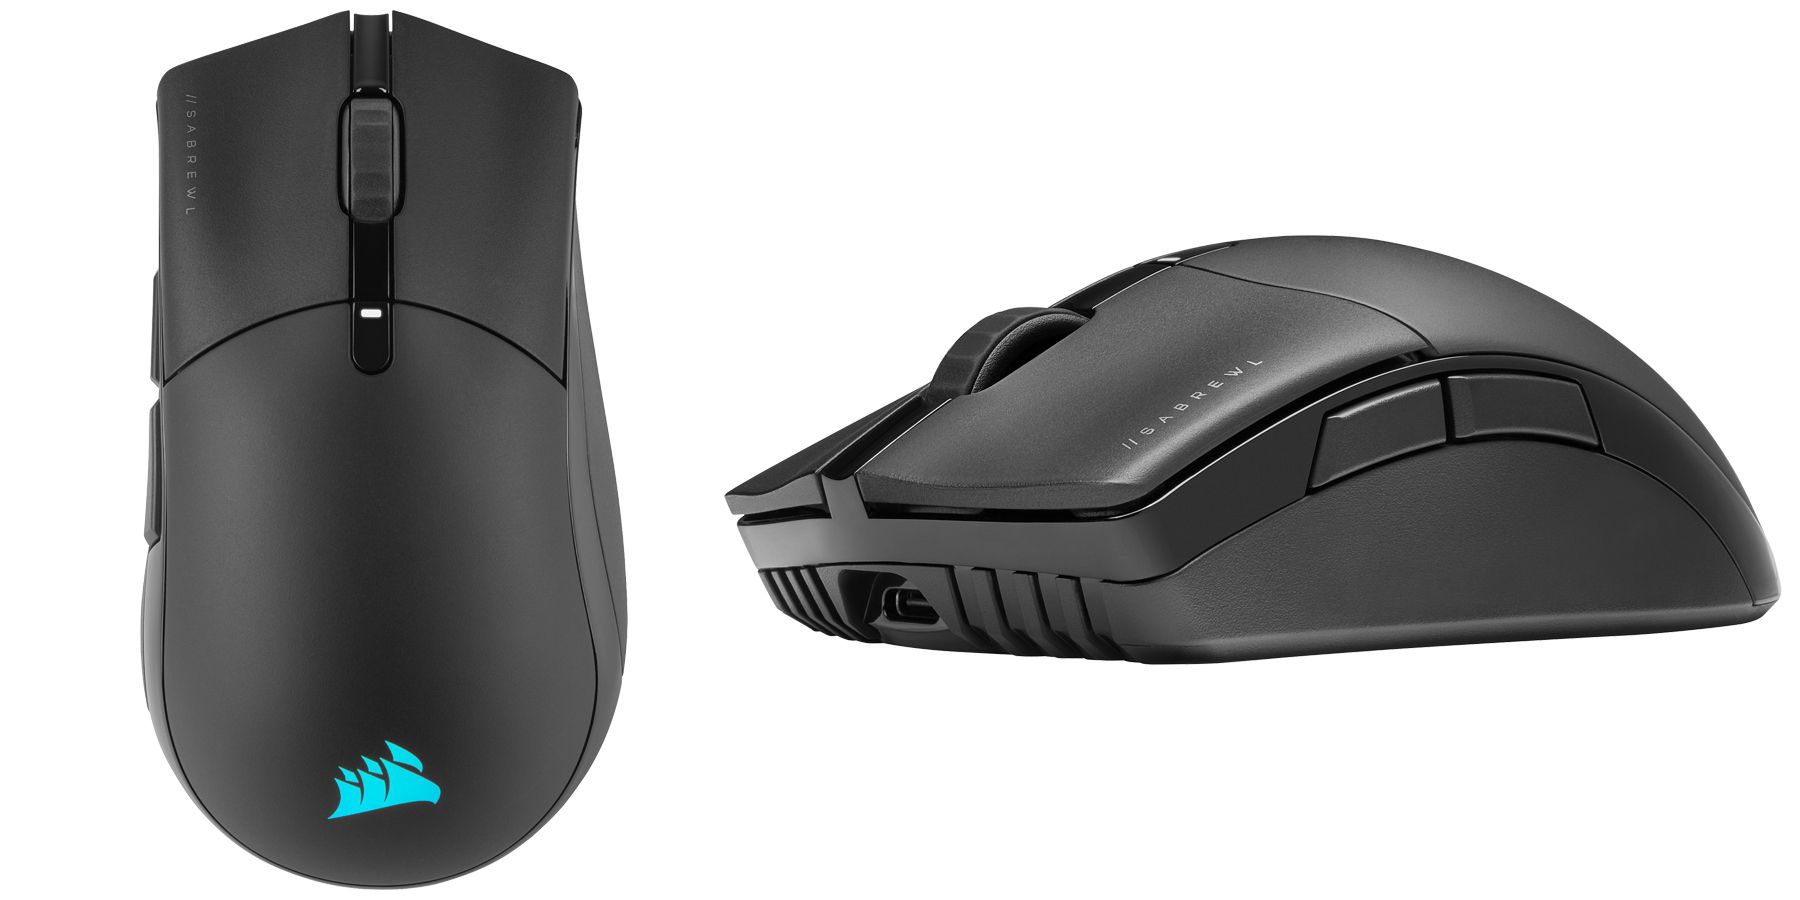 The 7 Most Important Things To Consider When Buying A Gaming Mouse